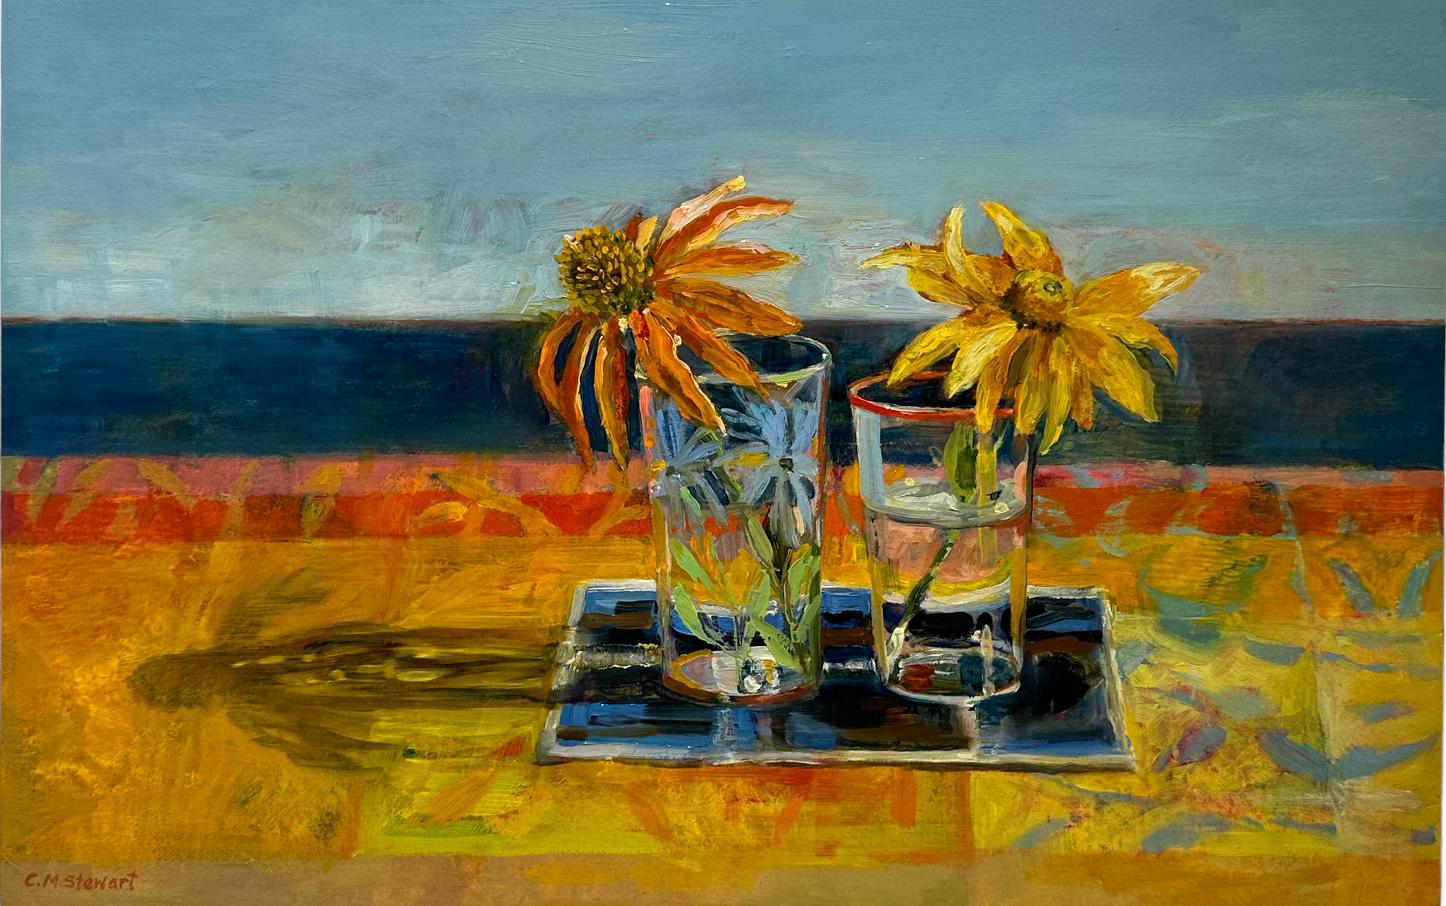 Coneflower, Rudbeckia - Colorful Floral Still Life Oil on Panel Painting